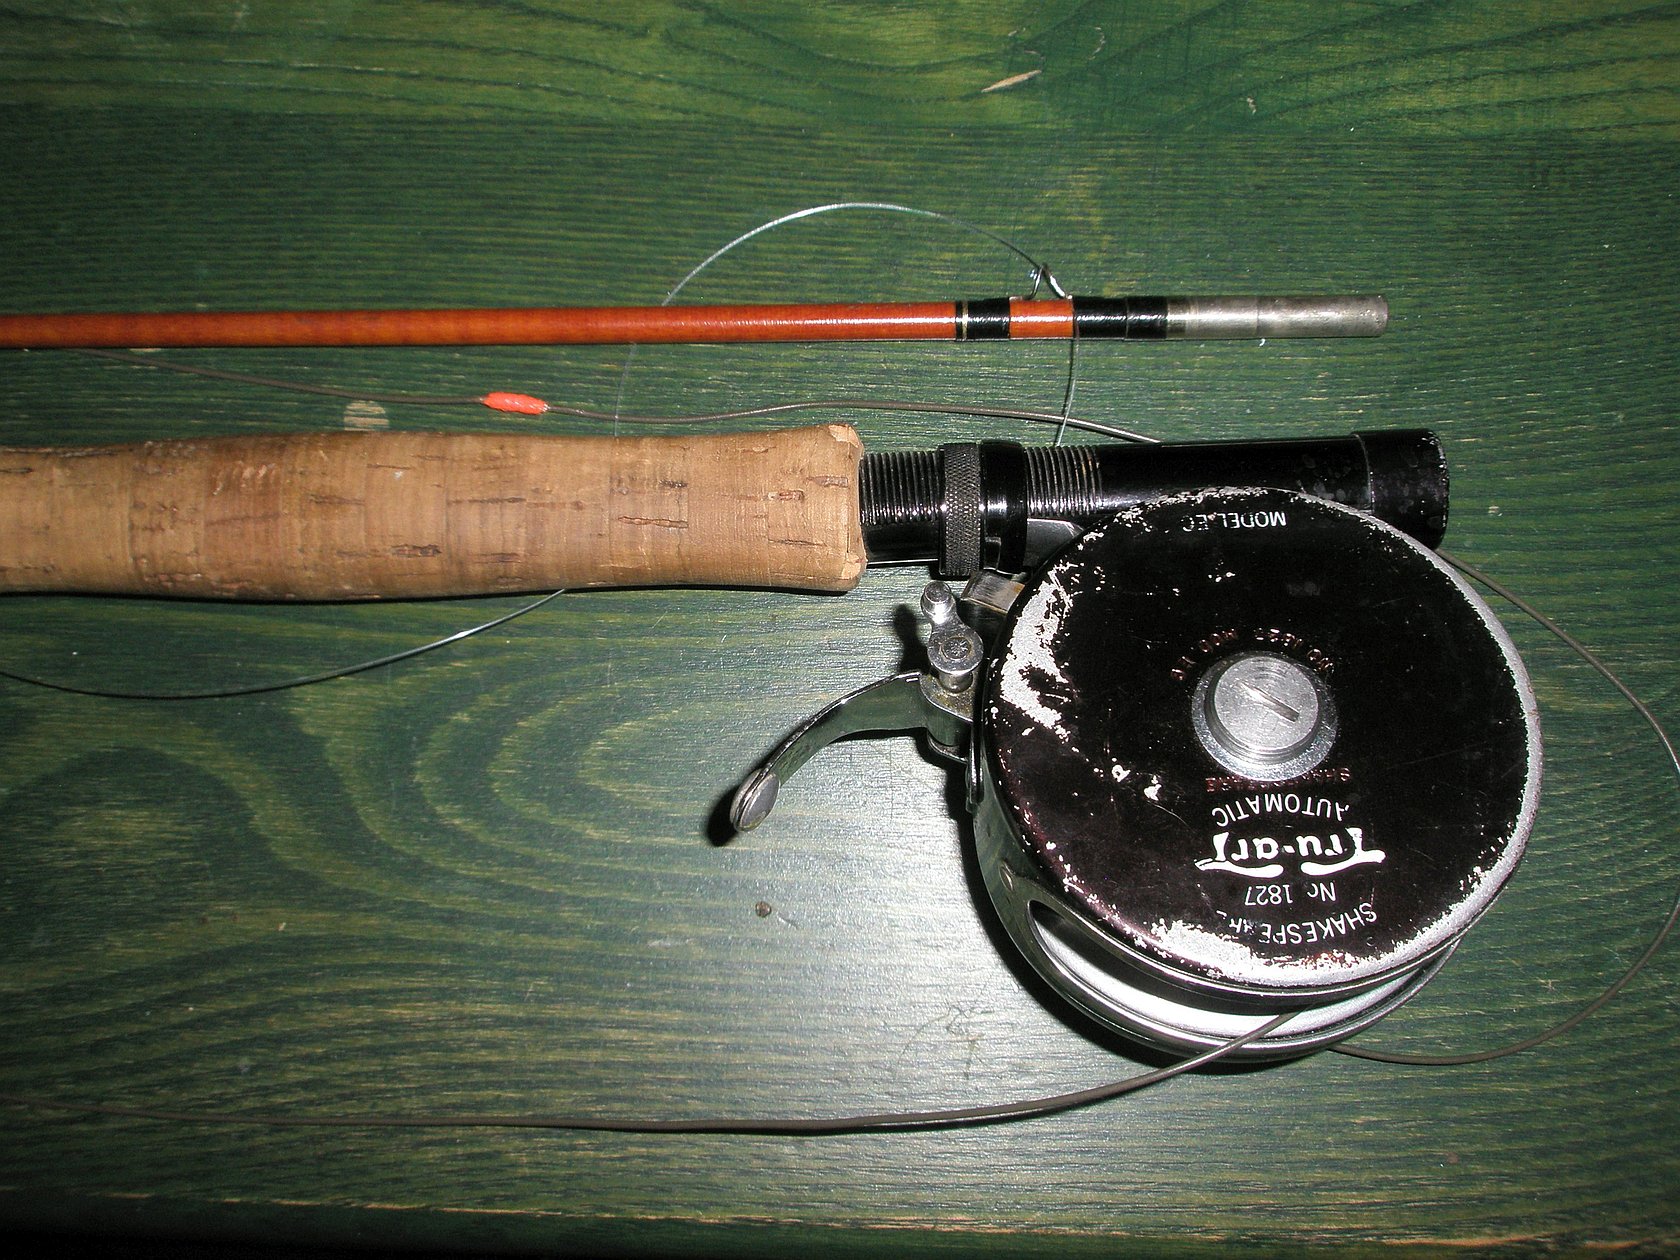 Shakespeare Mustang 2641/ Rimfly Fly Reels